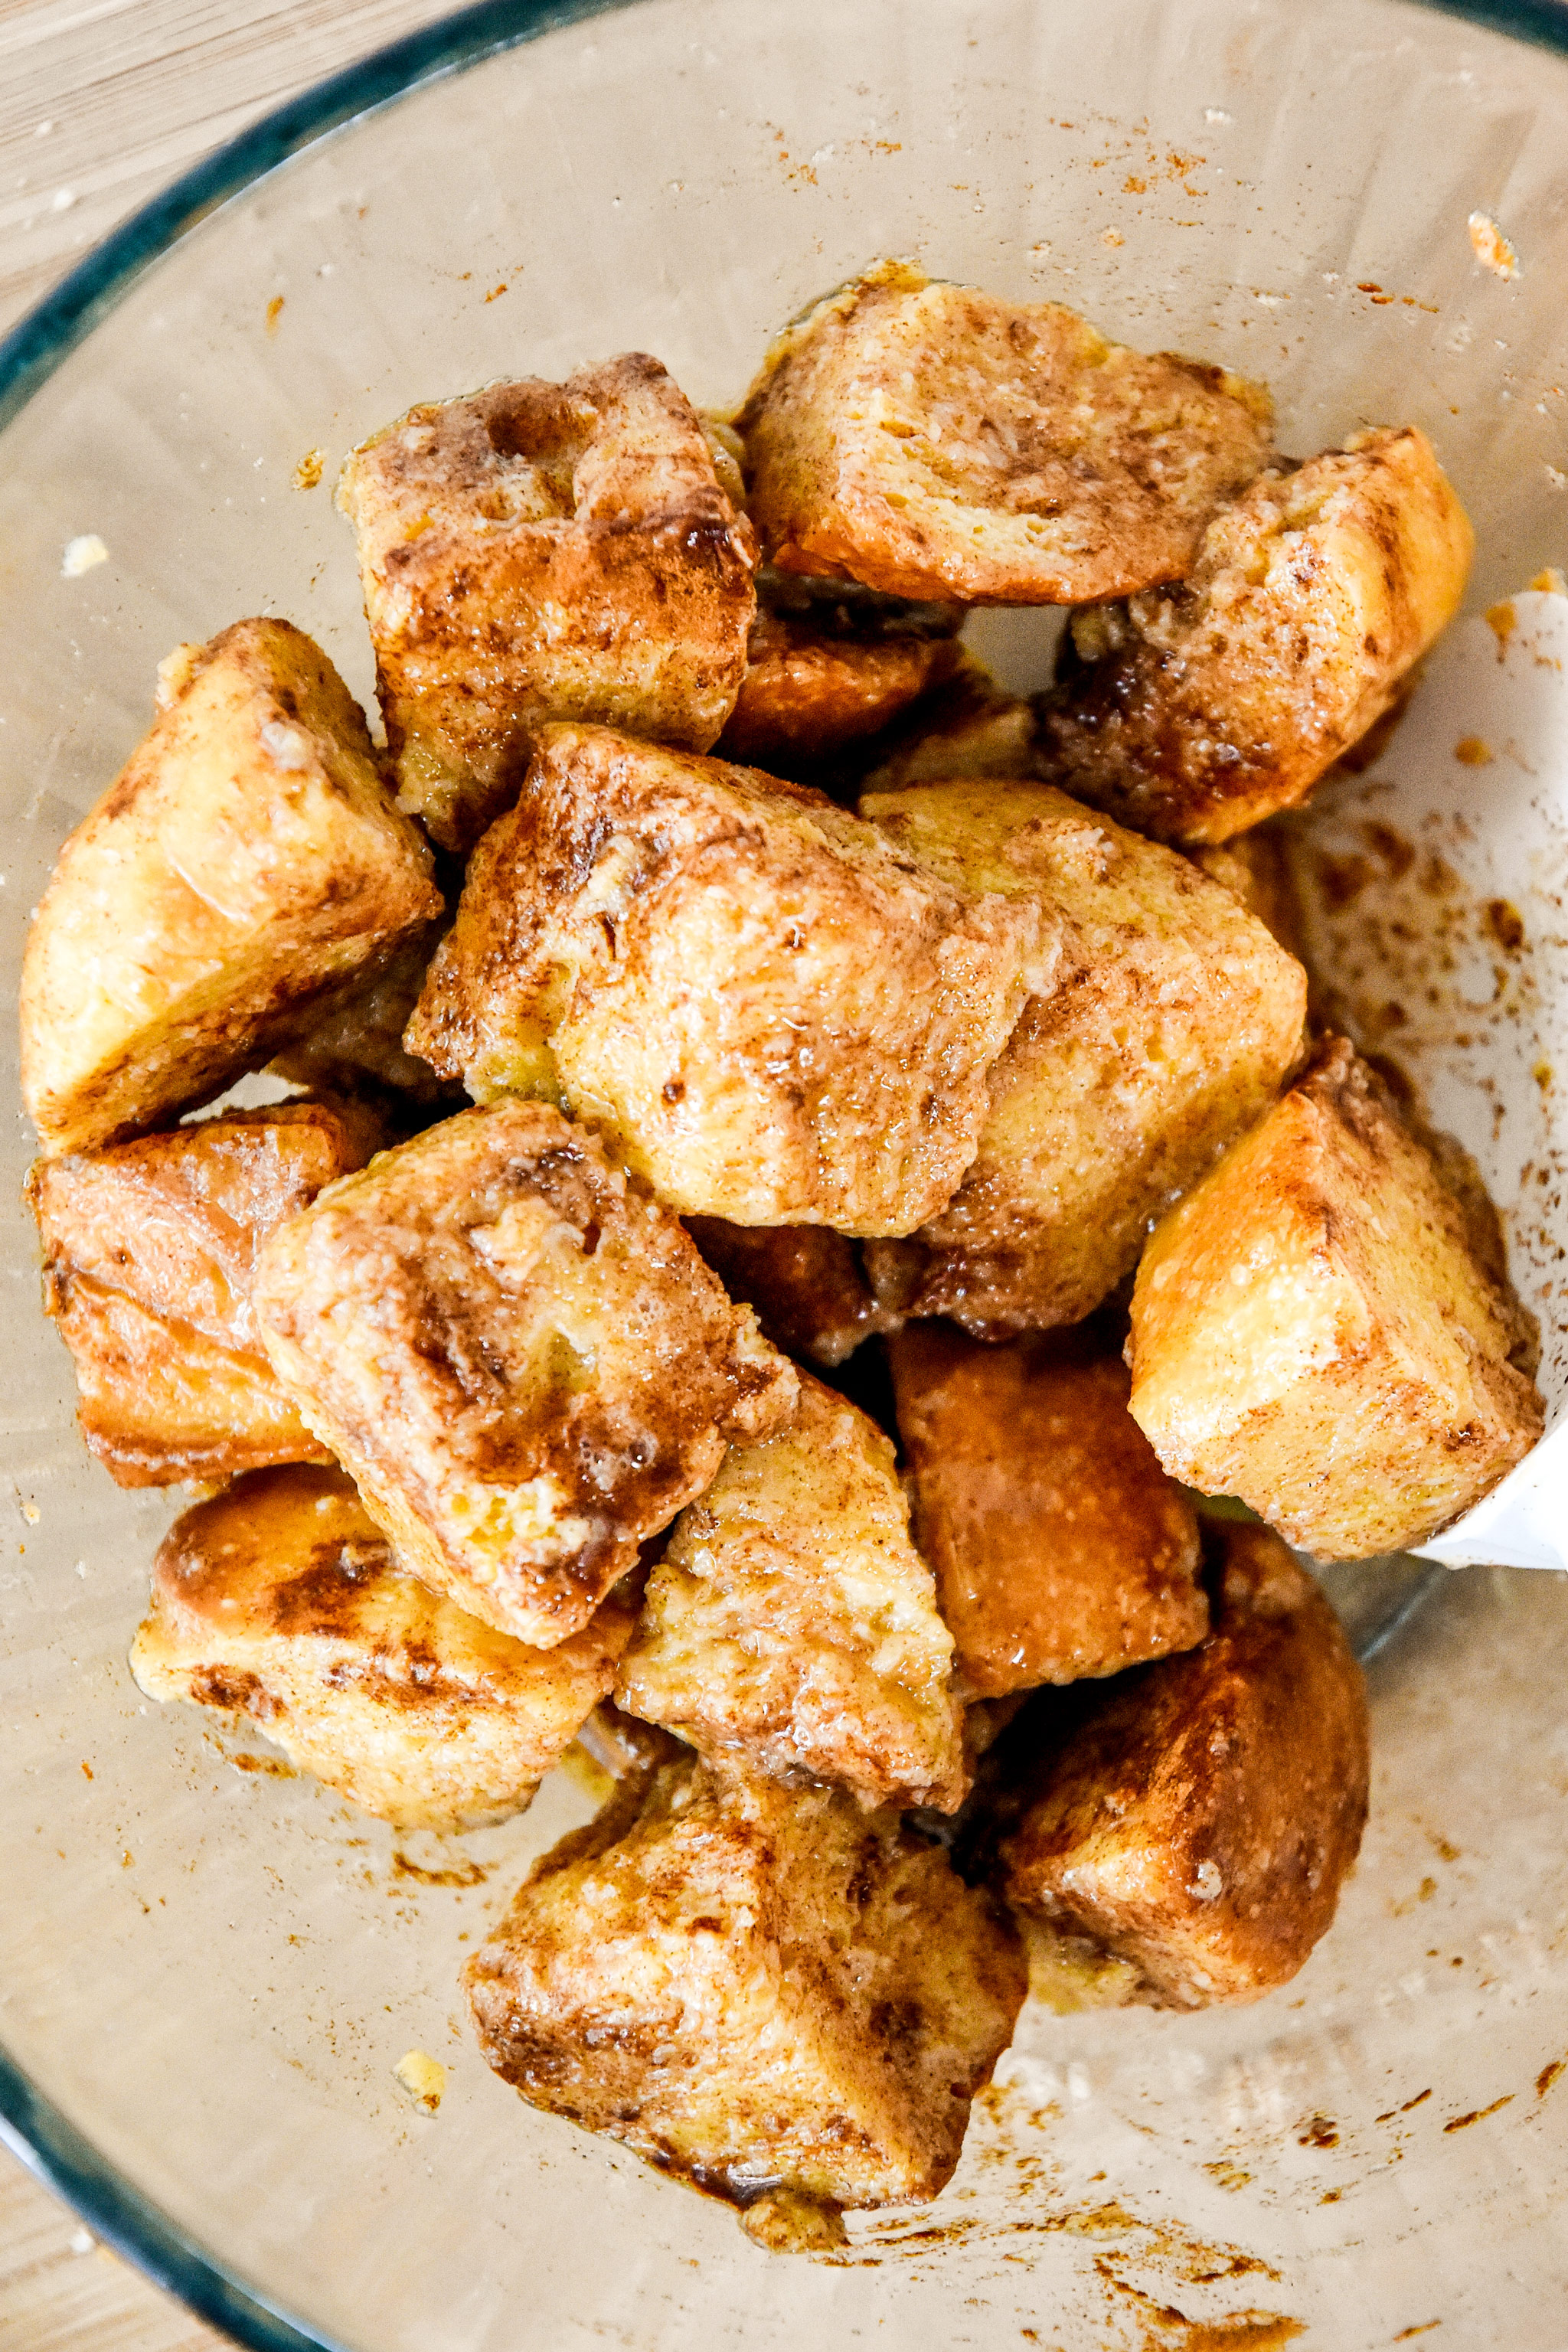 bread cubes soaked in egg mixture and cinnamon in a glass bowl.